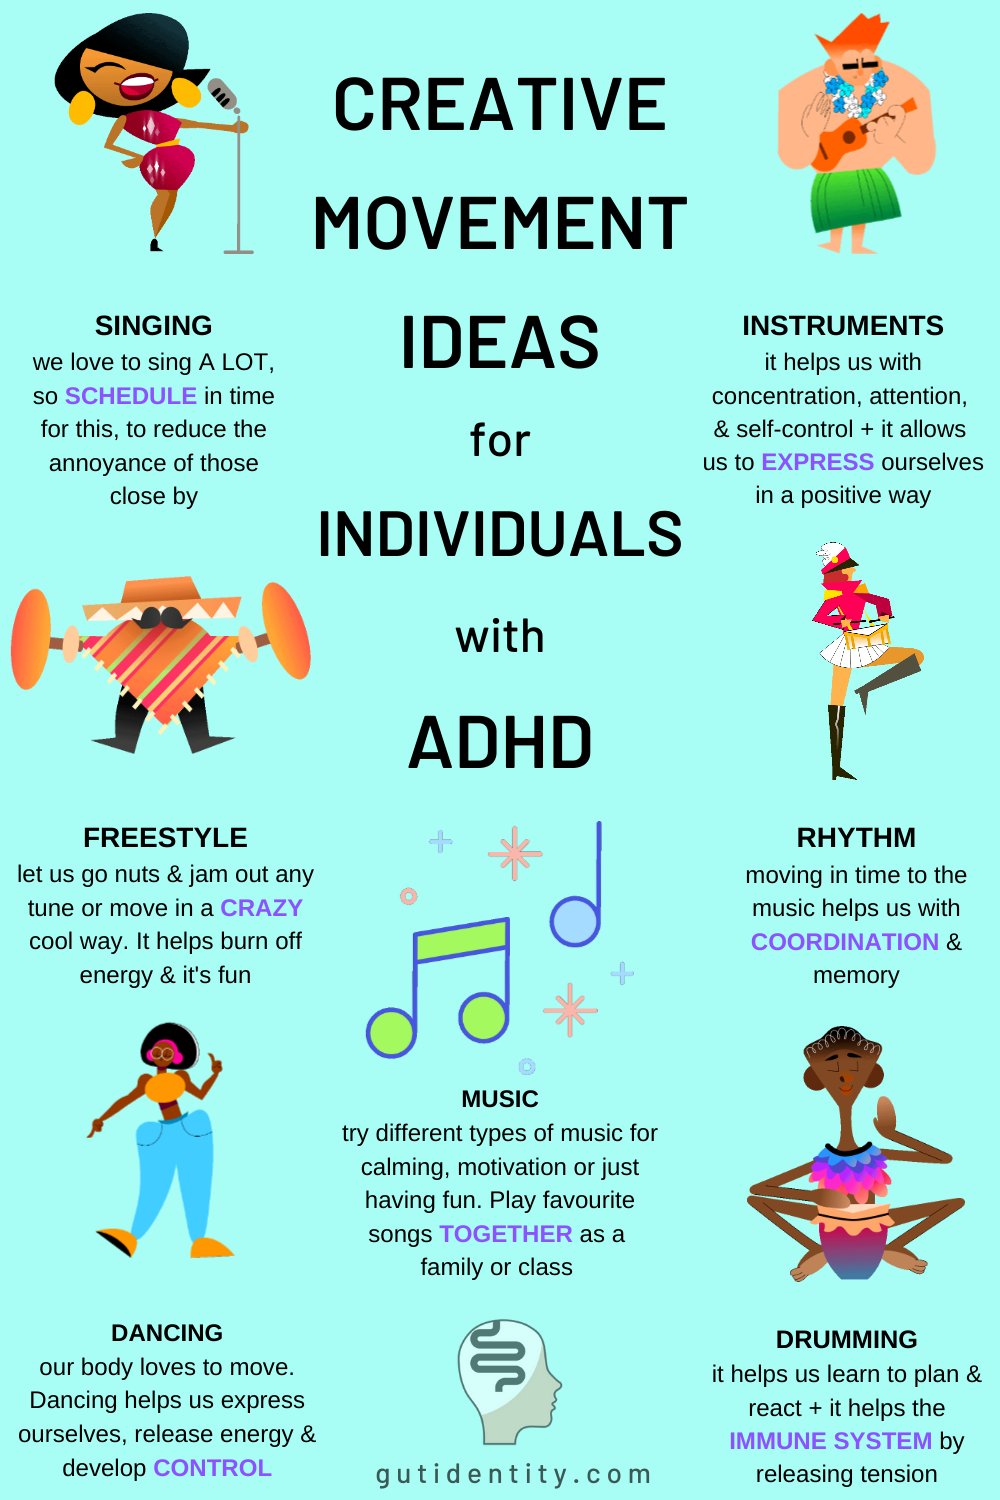 Creative Movement Ideas for Children with ADHD by Gutidentity